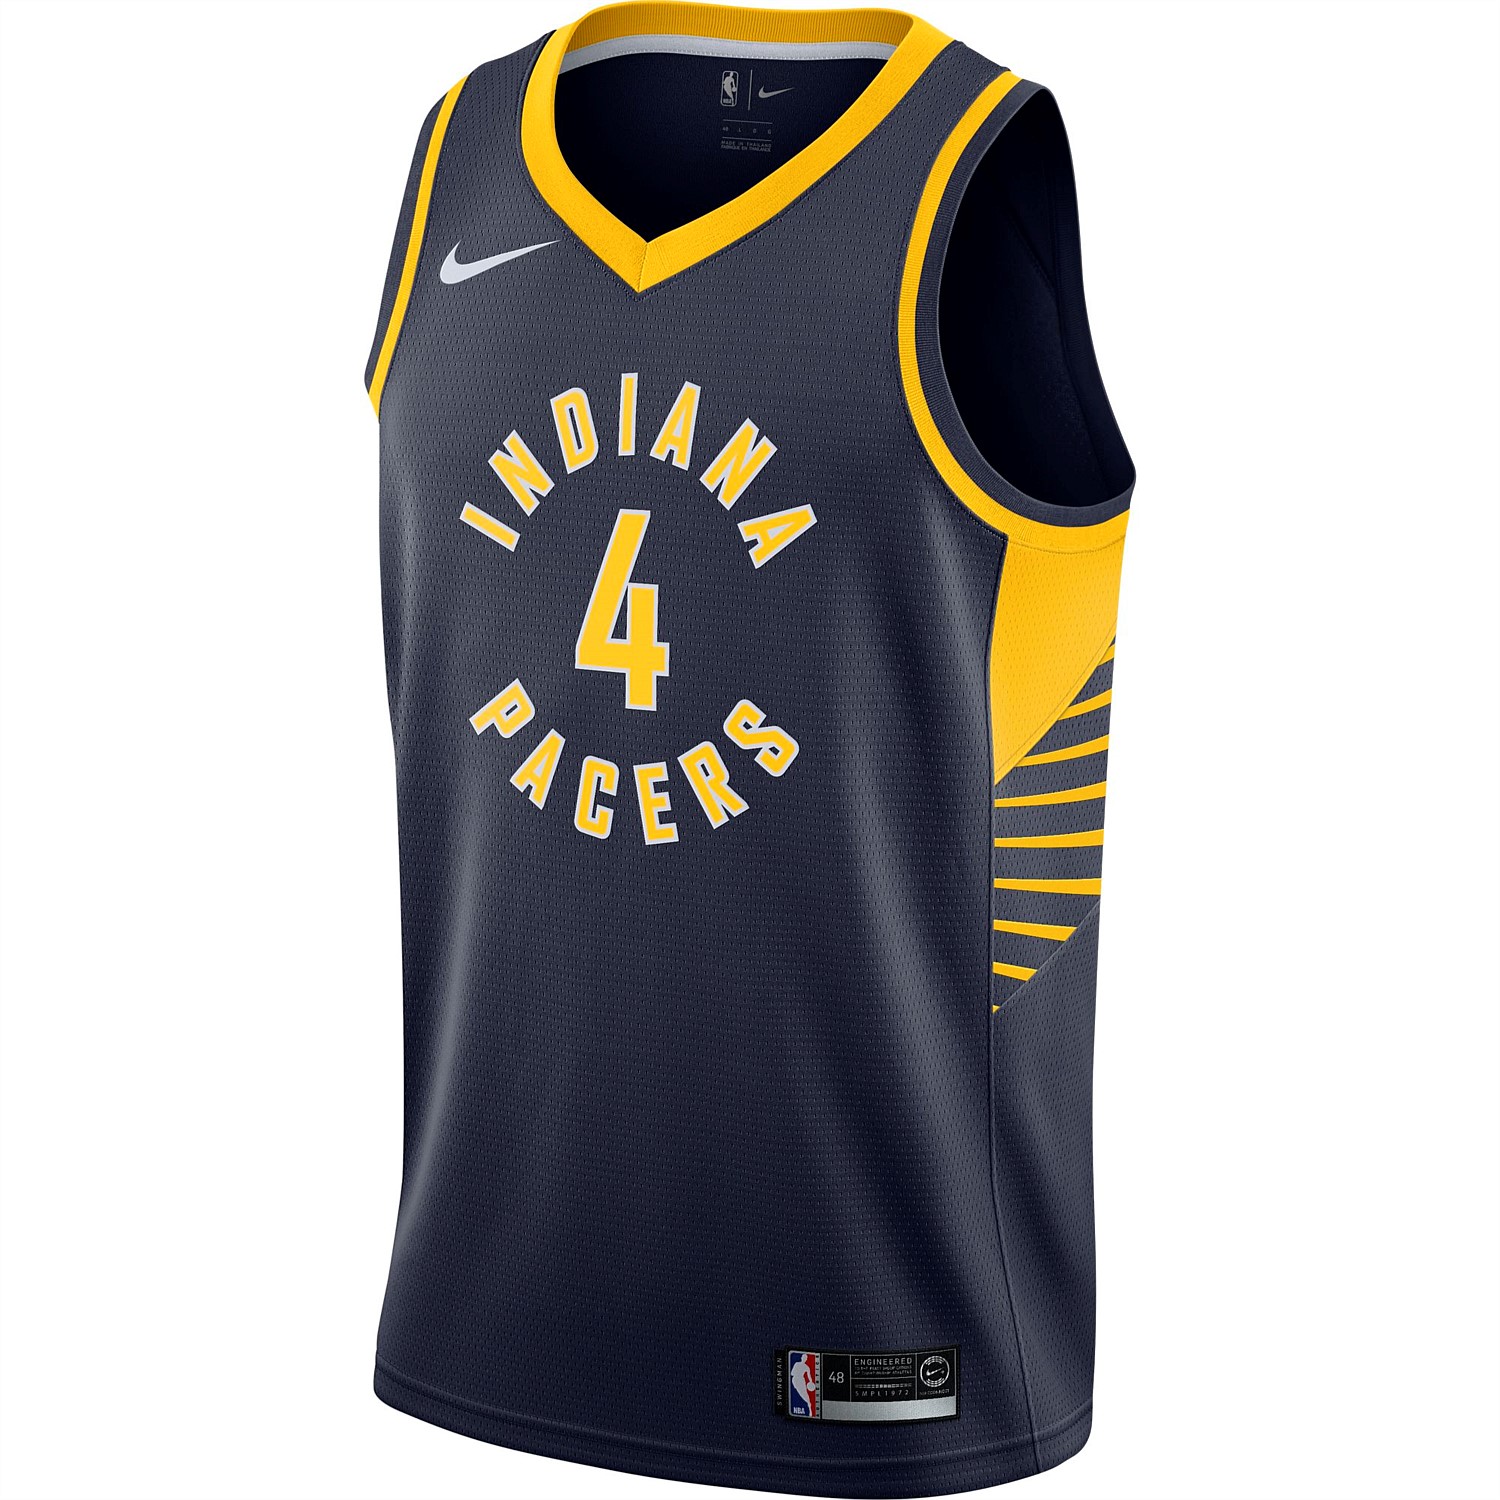 indiana pacers women's clothing